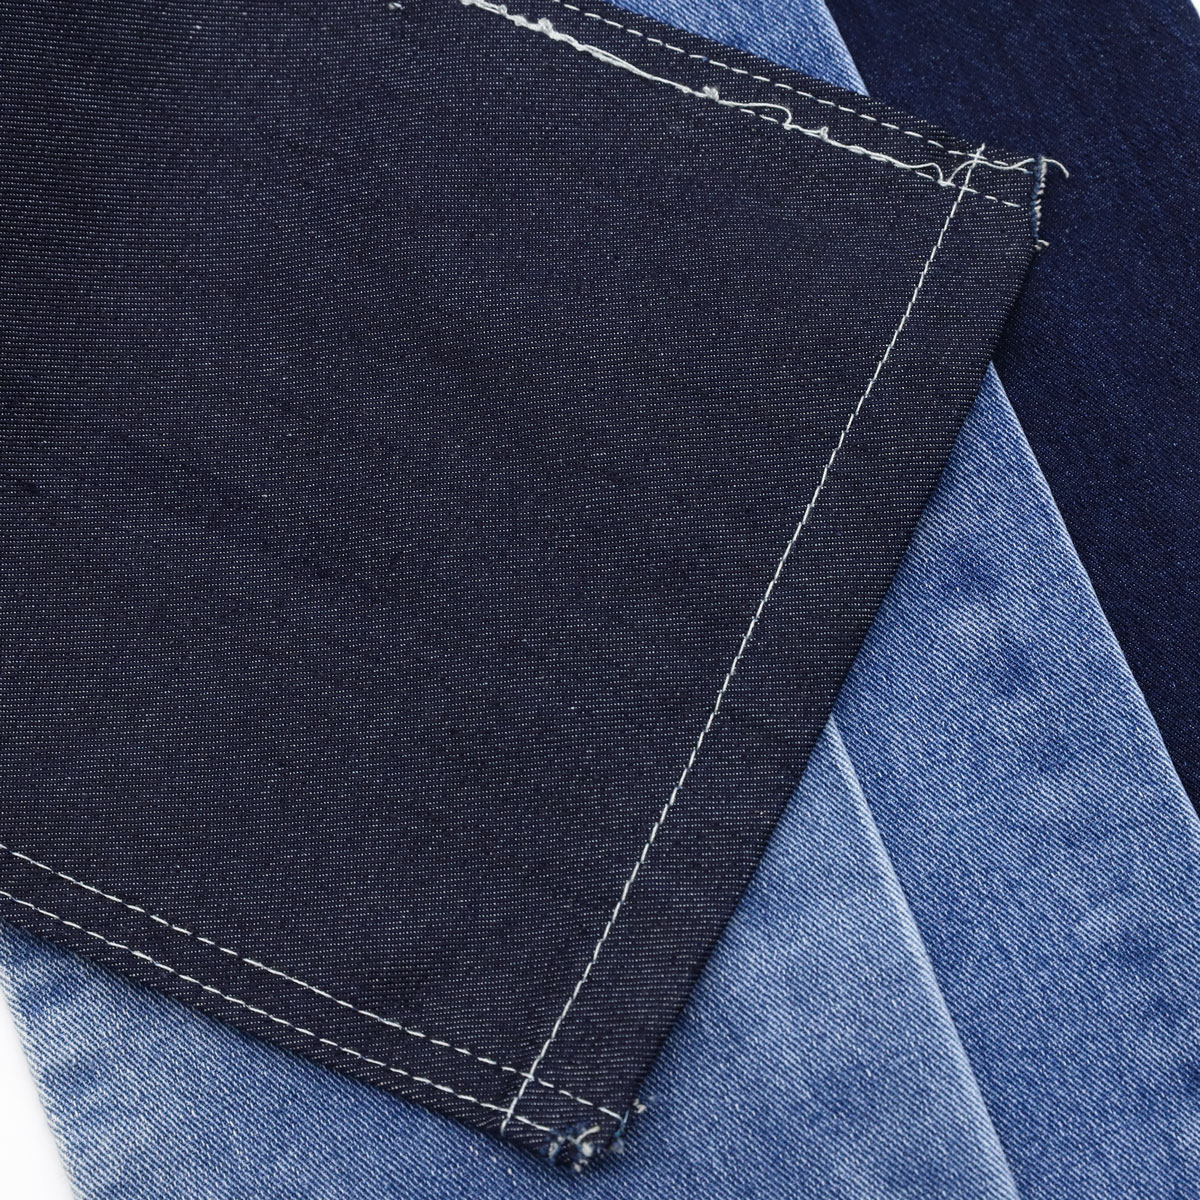 Jeans Fabric Manufacturers - How to Use the Best One for Your Needs 2